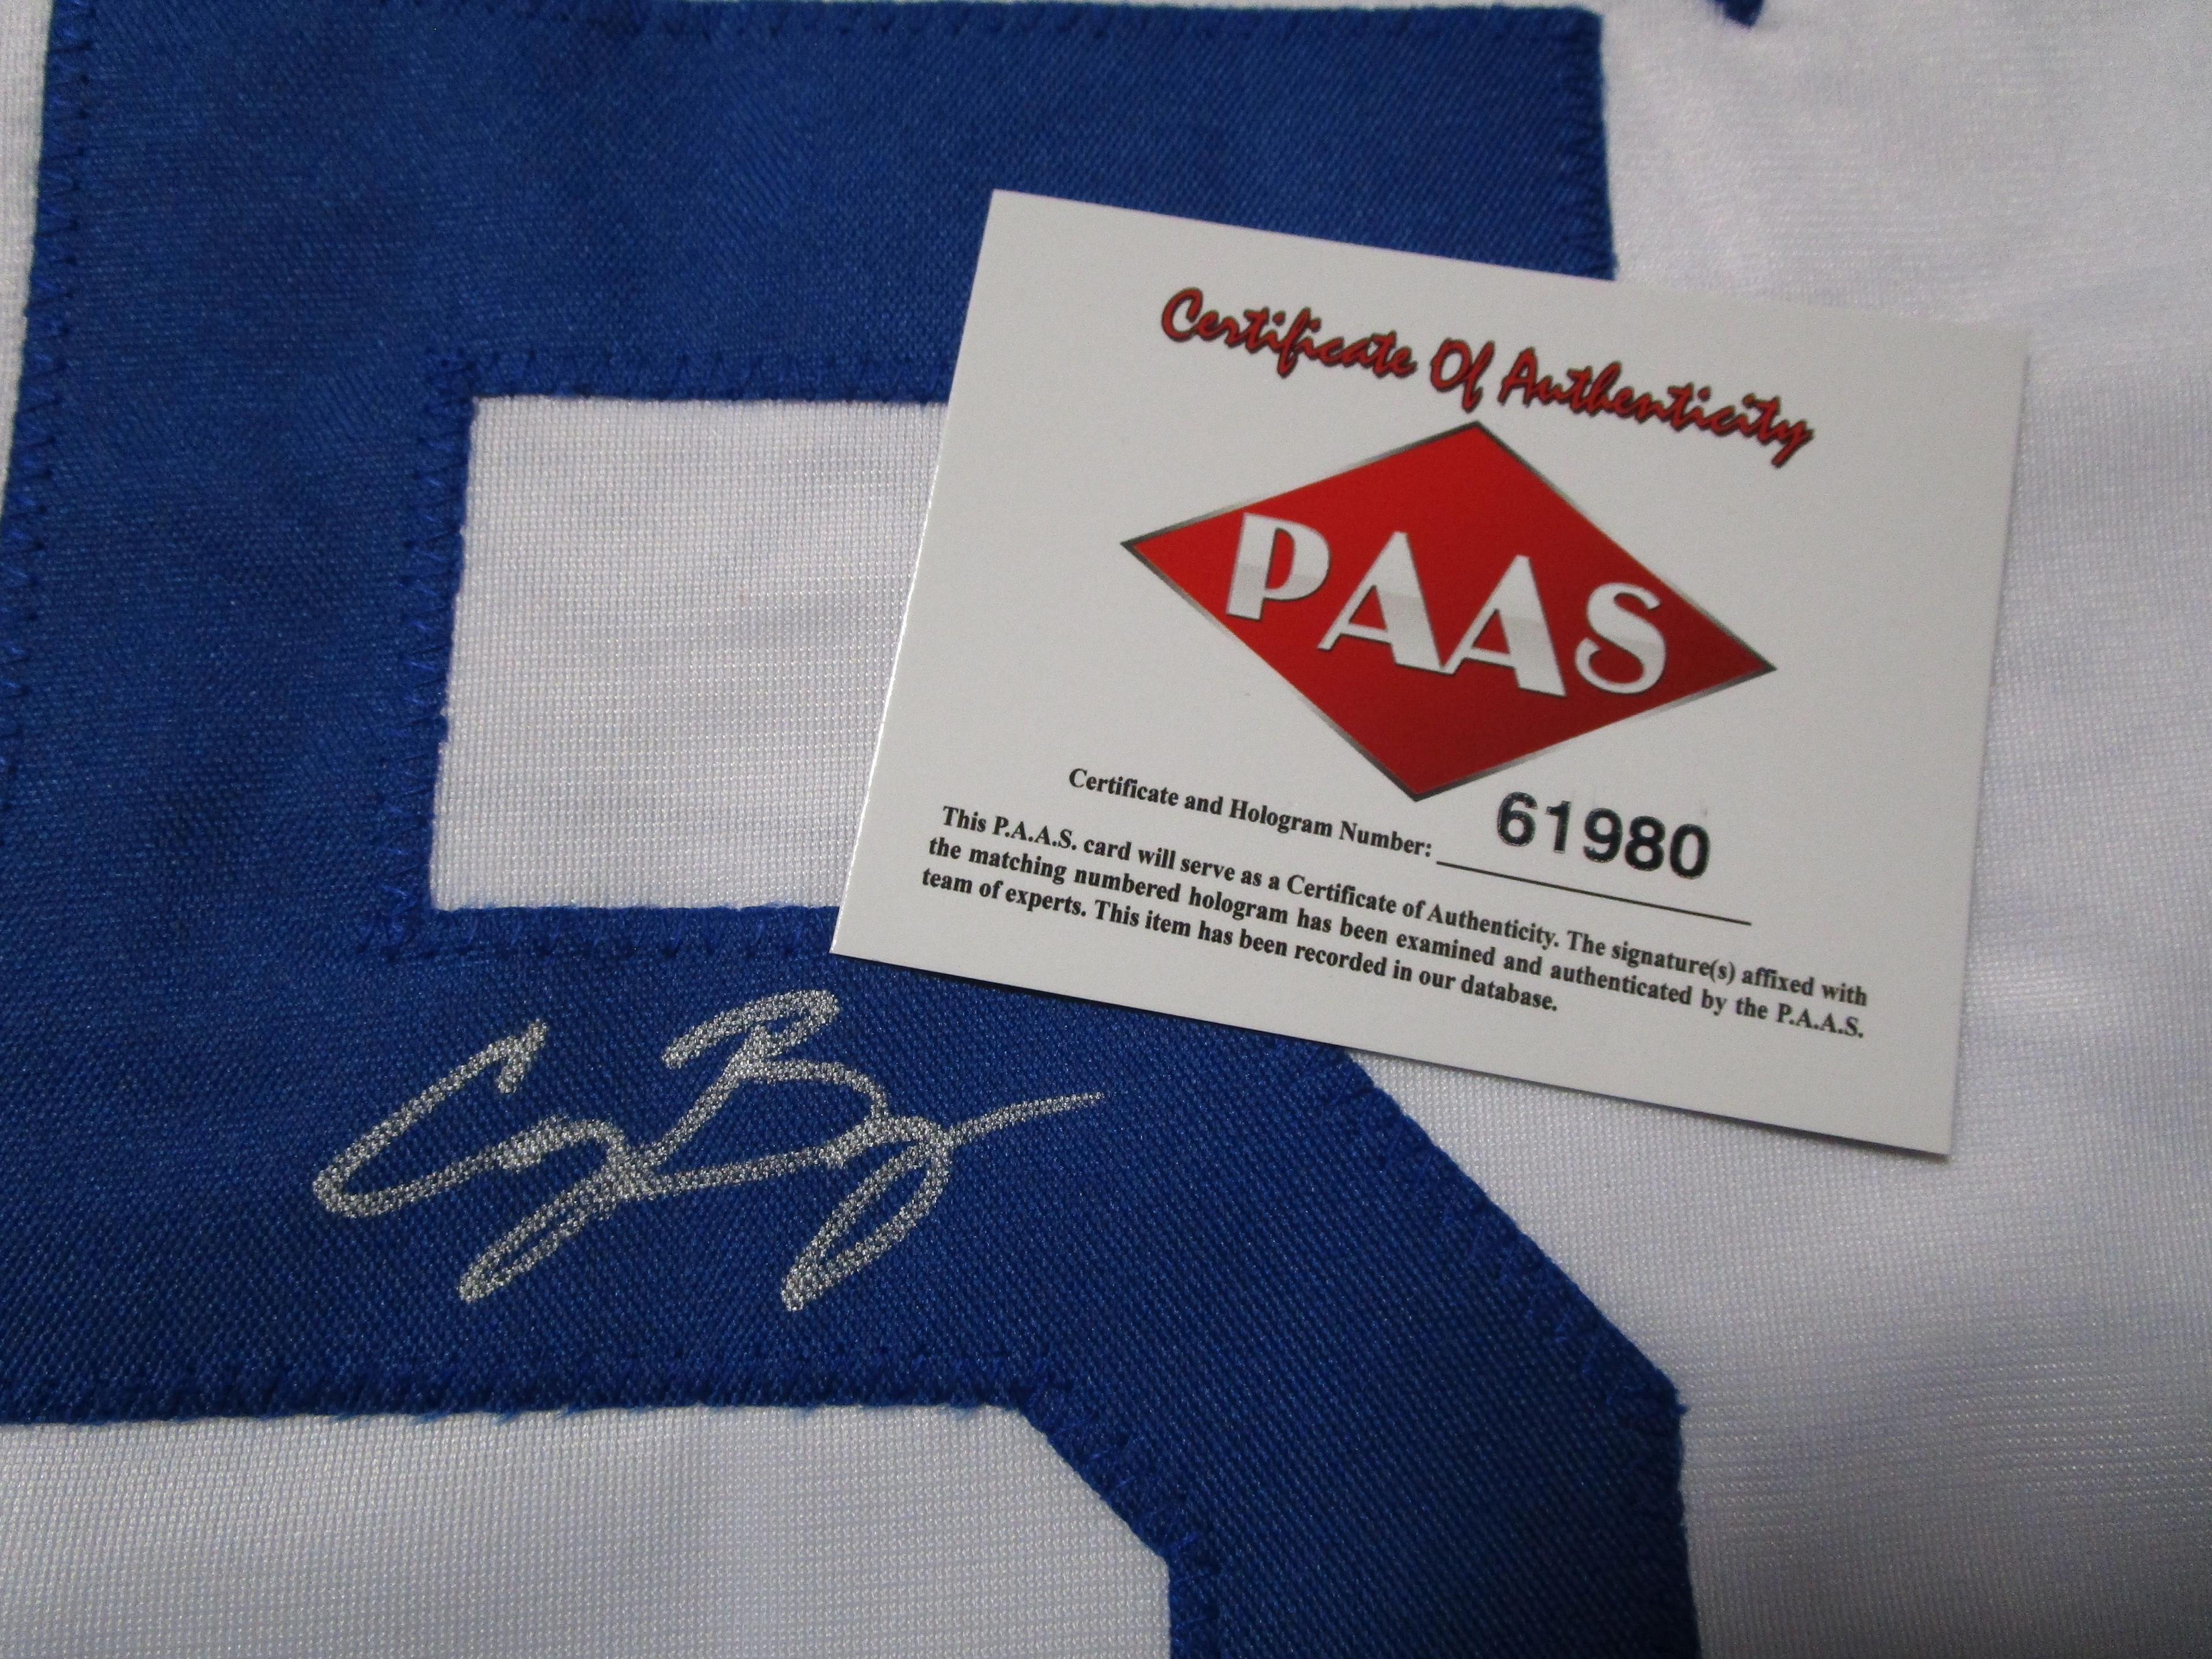 Cody Bellinger of the LA Dodgers signed autographed baseball jersey PAAS COA 980